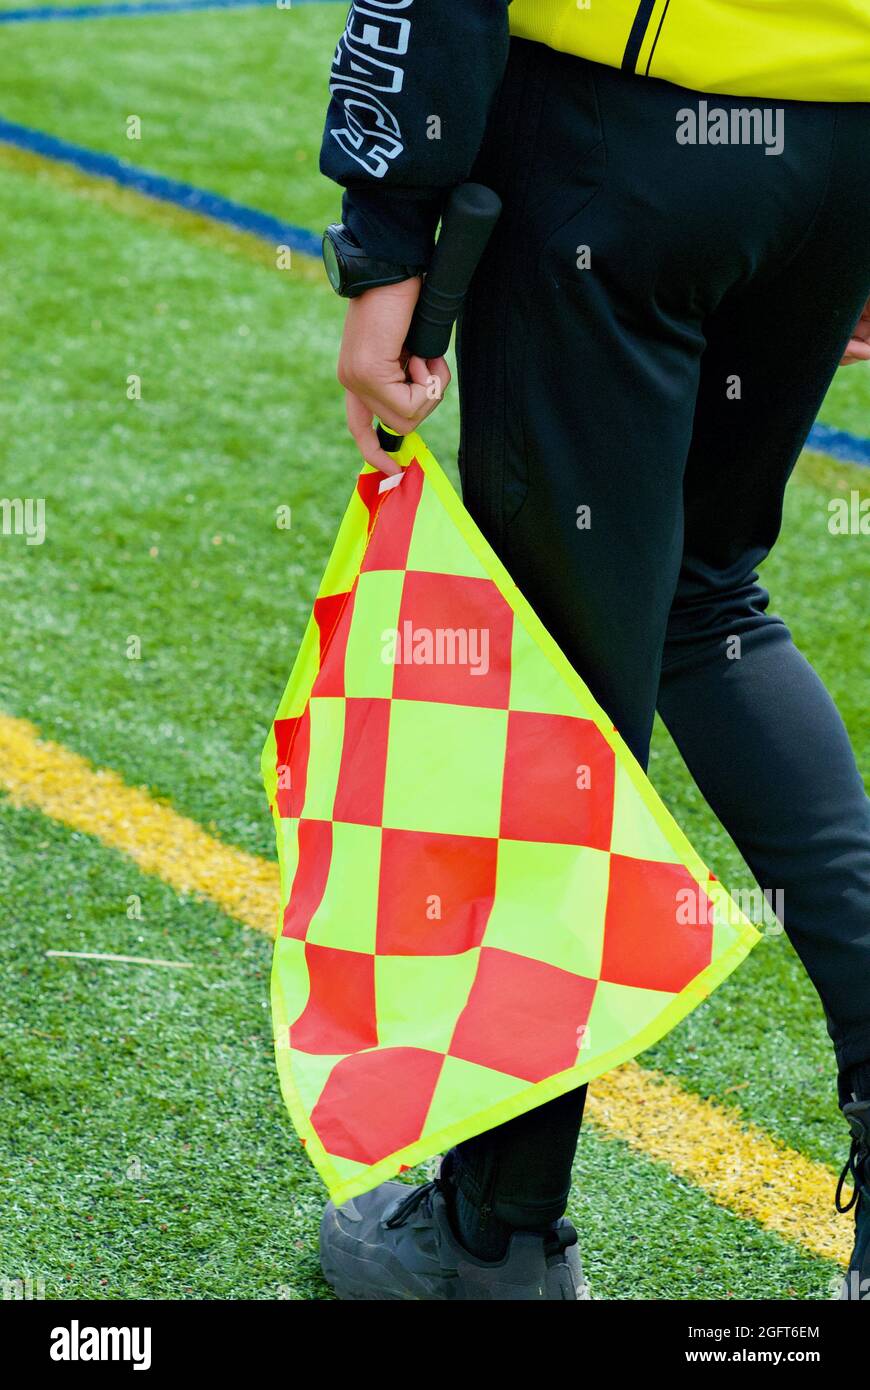 Annandale, Virginia / USA - April 24, 2021: Close-up image of a soccer sideline judge's colorful flag. Stock Photo